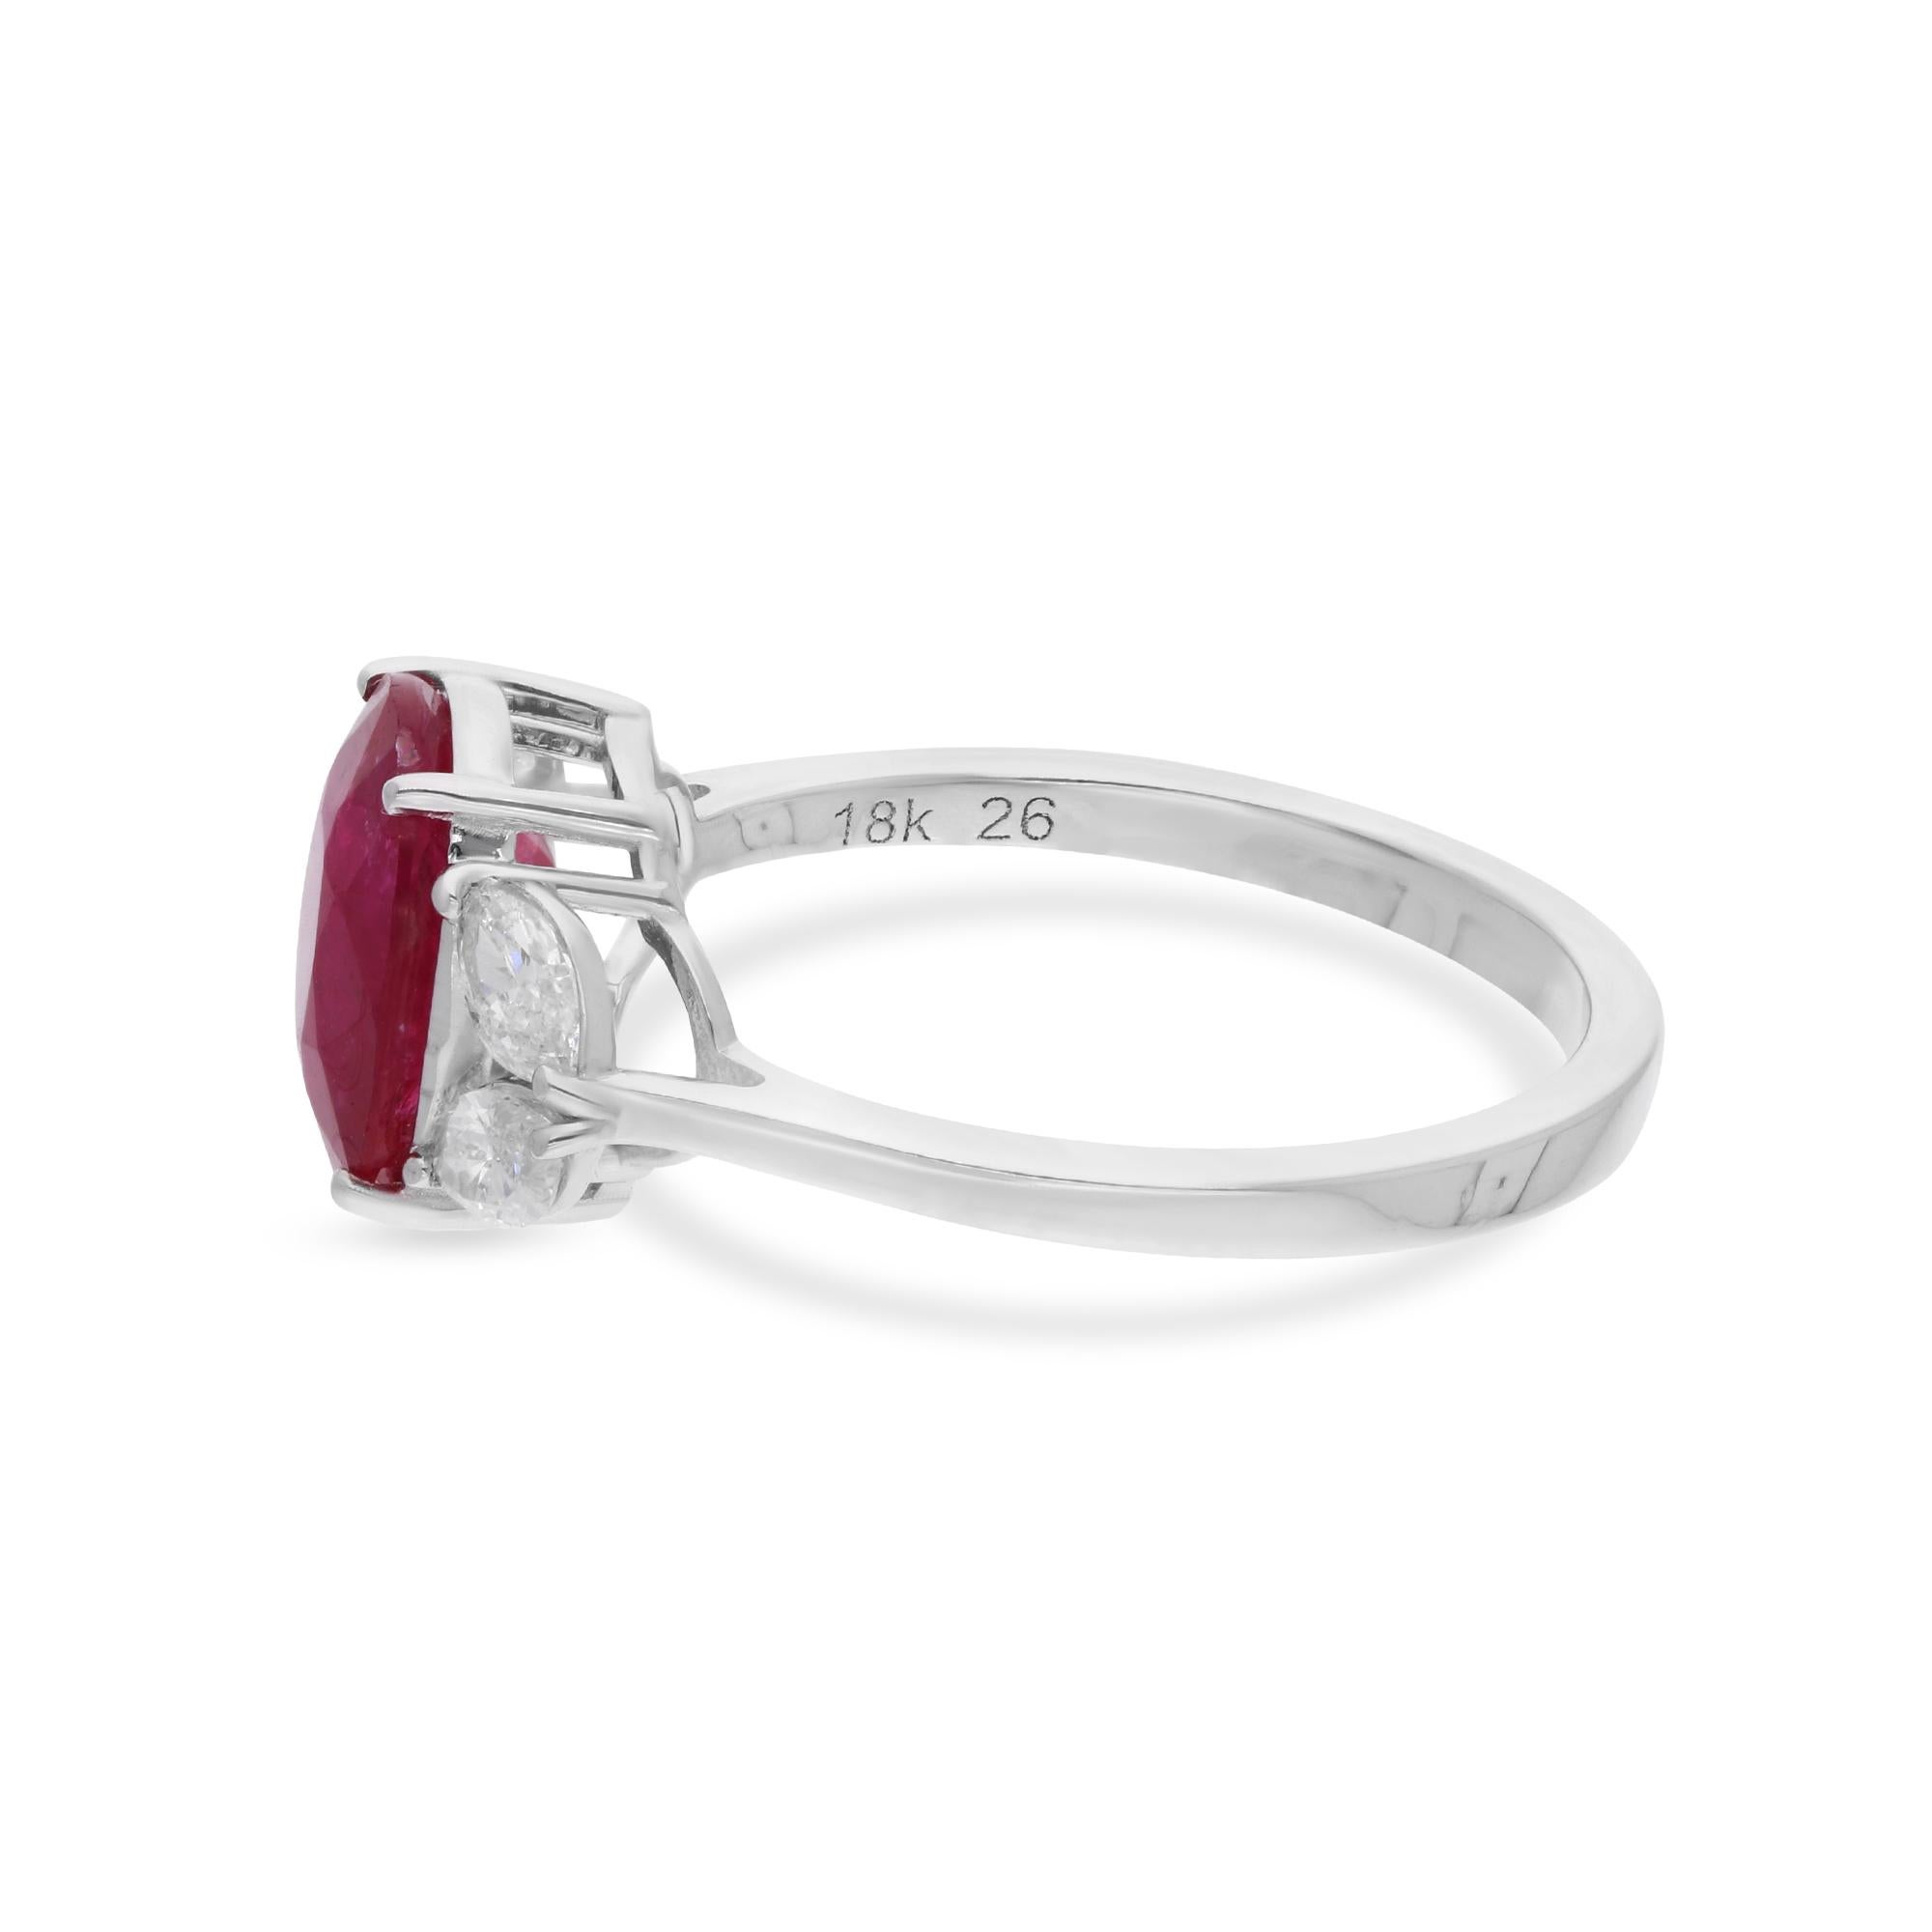 Immerse yourself in the luxurious allure of this Natural Ruby Gemstone Cocktail Ring, adorned with exquisite marquise diamonds and meticulously crafted in 18 karat white gold. This stunning piece of fine jewelry is a celebration of sophistication